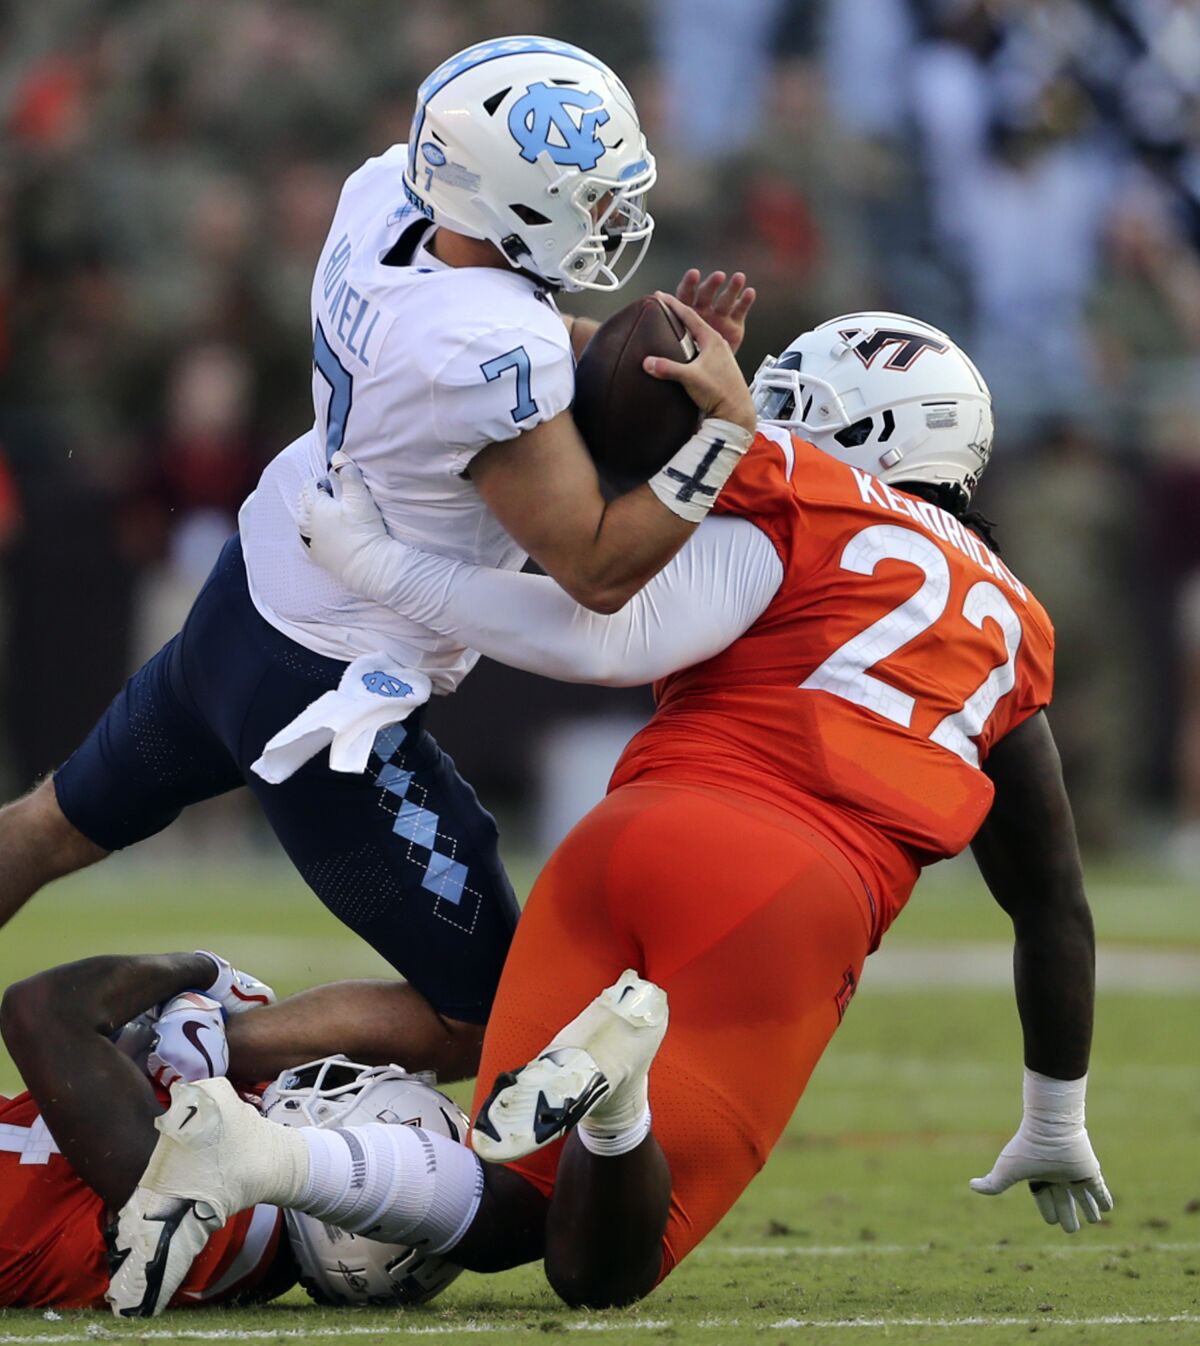 North Carolina quarterback Sam Howell (7) is sacked by Virginia Tech's Chamarri Conner (22) during the first half of an NCAA college football game Friday, Sept. 3, 2021, in Blacksburg, Va. (Matt Gentry/The Roanoke Times via AP)